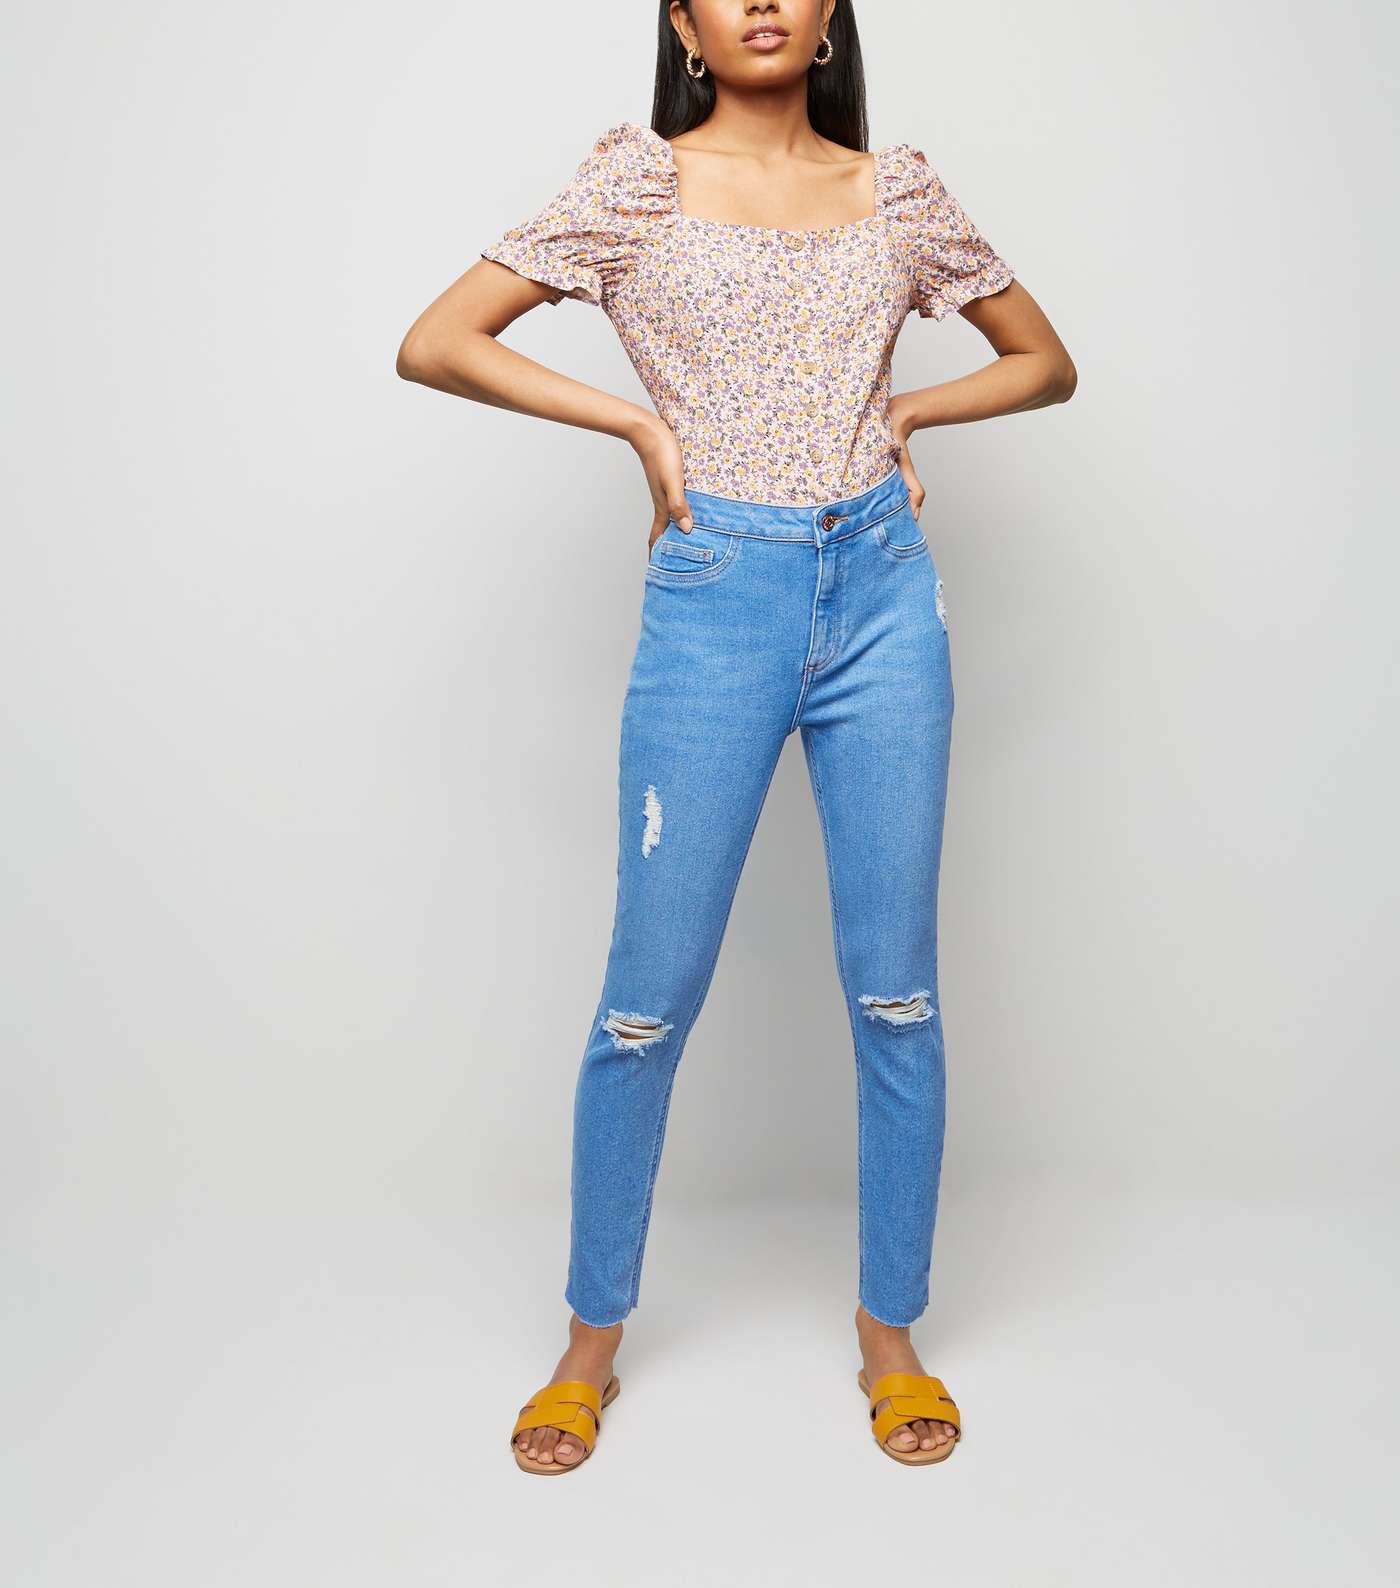 Petite Bright Blue High Waist Ripped Skinny Jeans